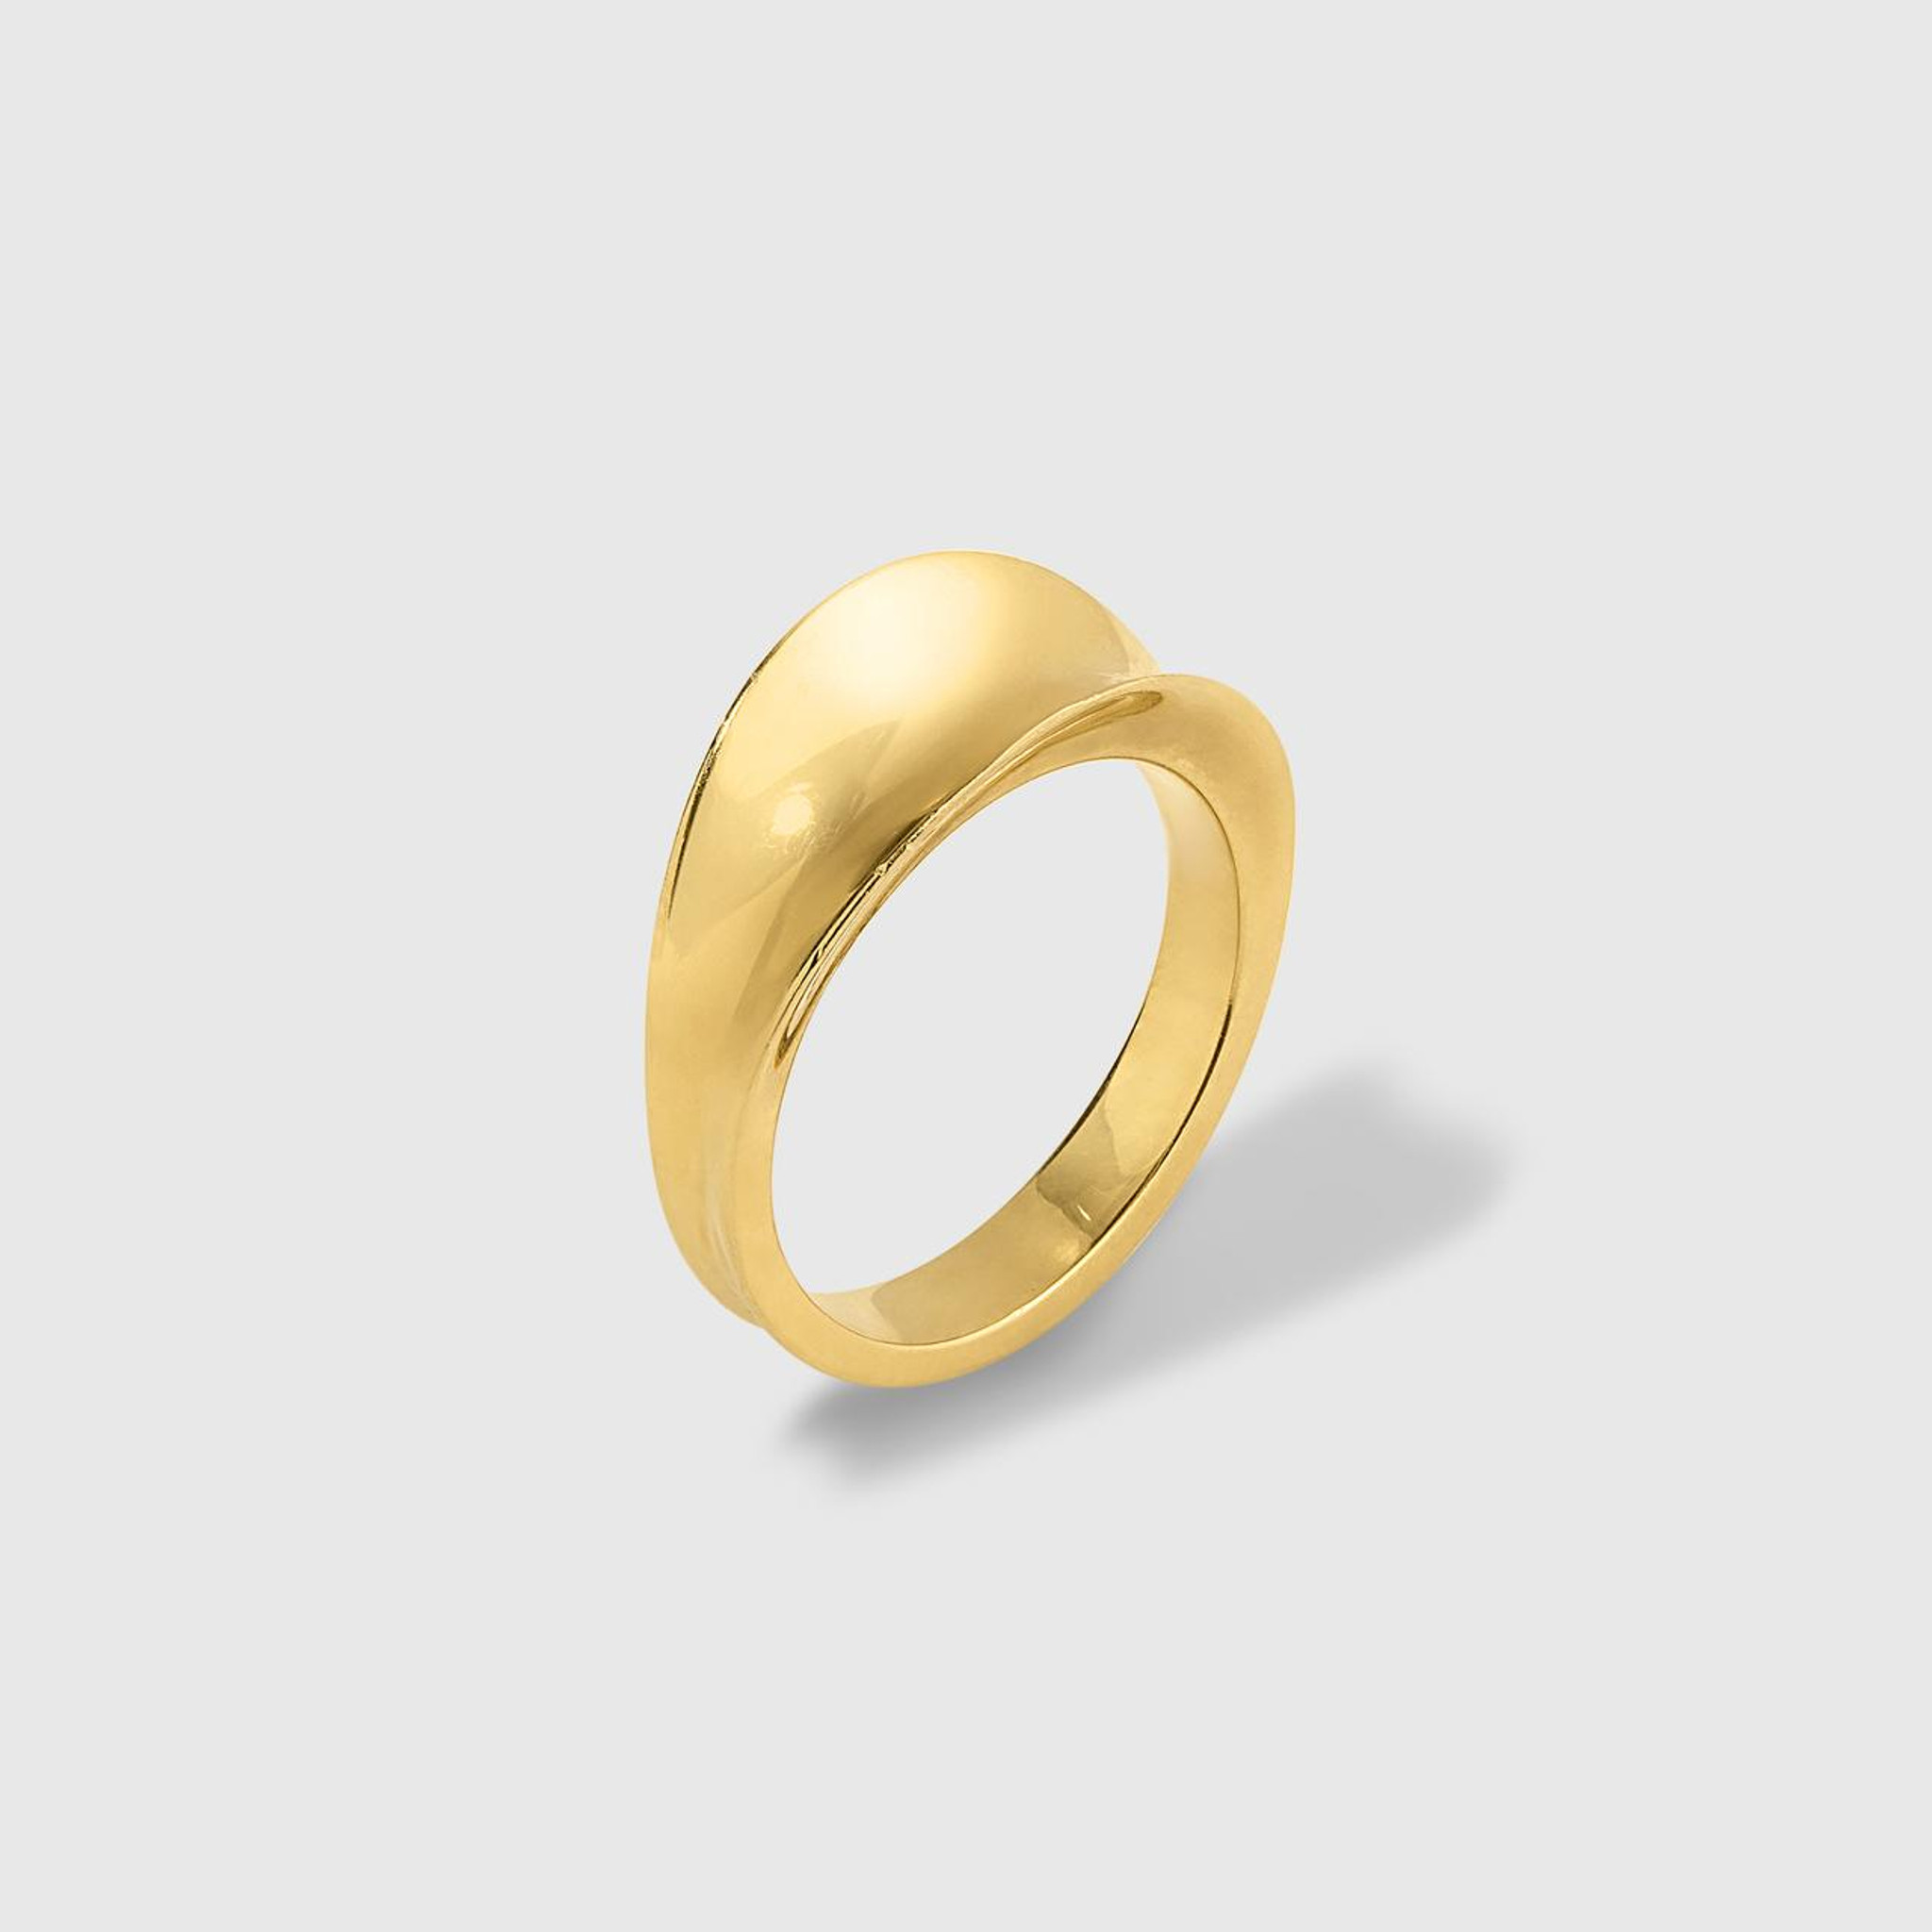 Ashley Childs The Maia Ring, 18kt Yellow Gold 